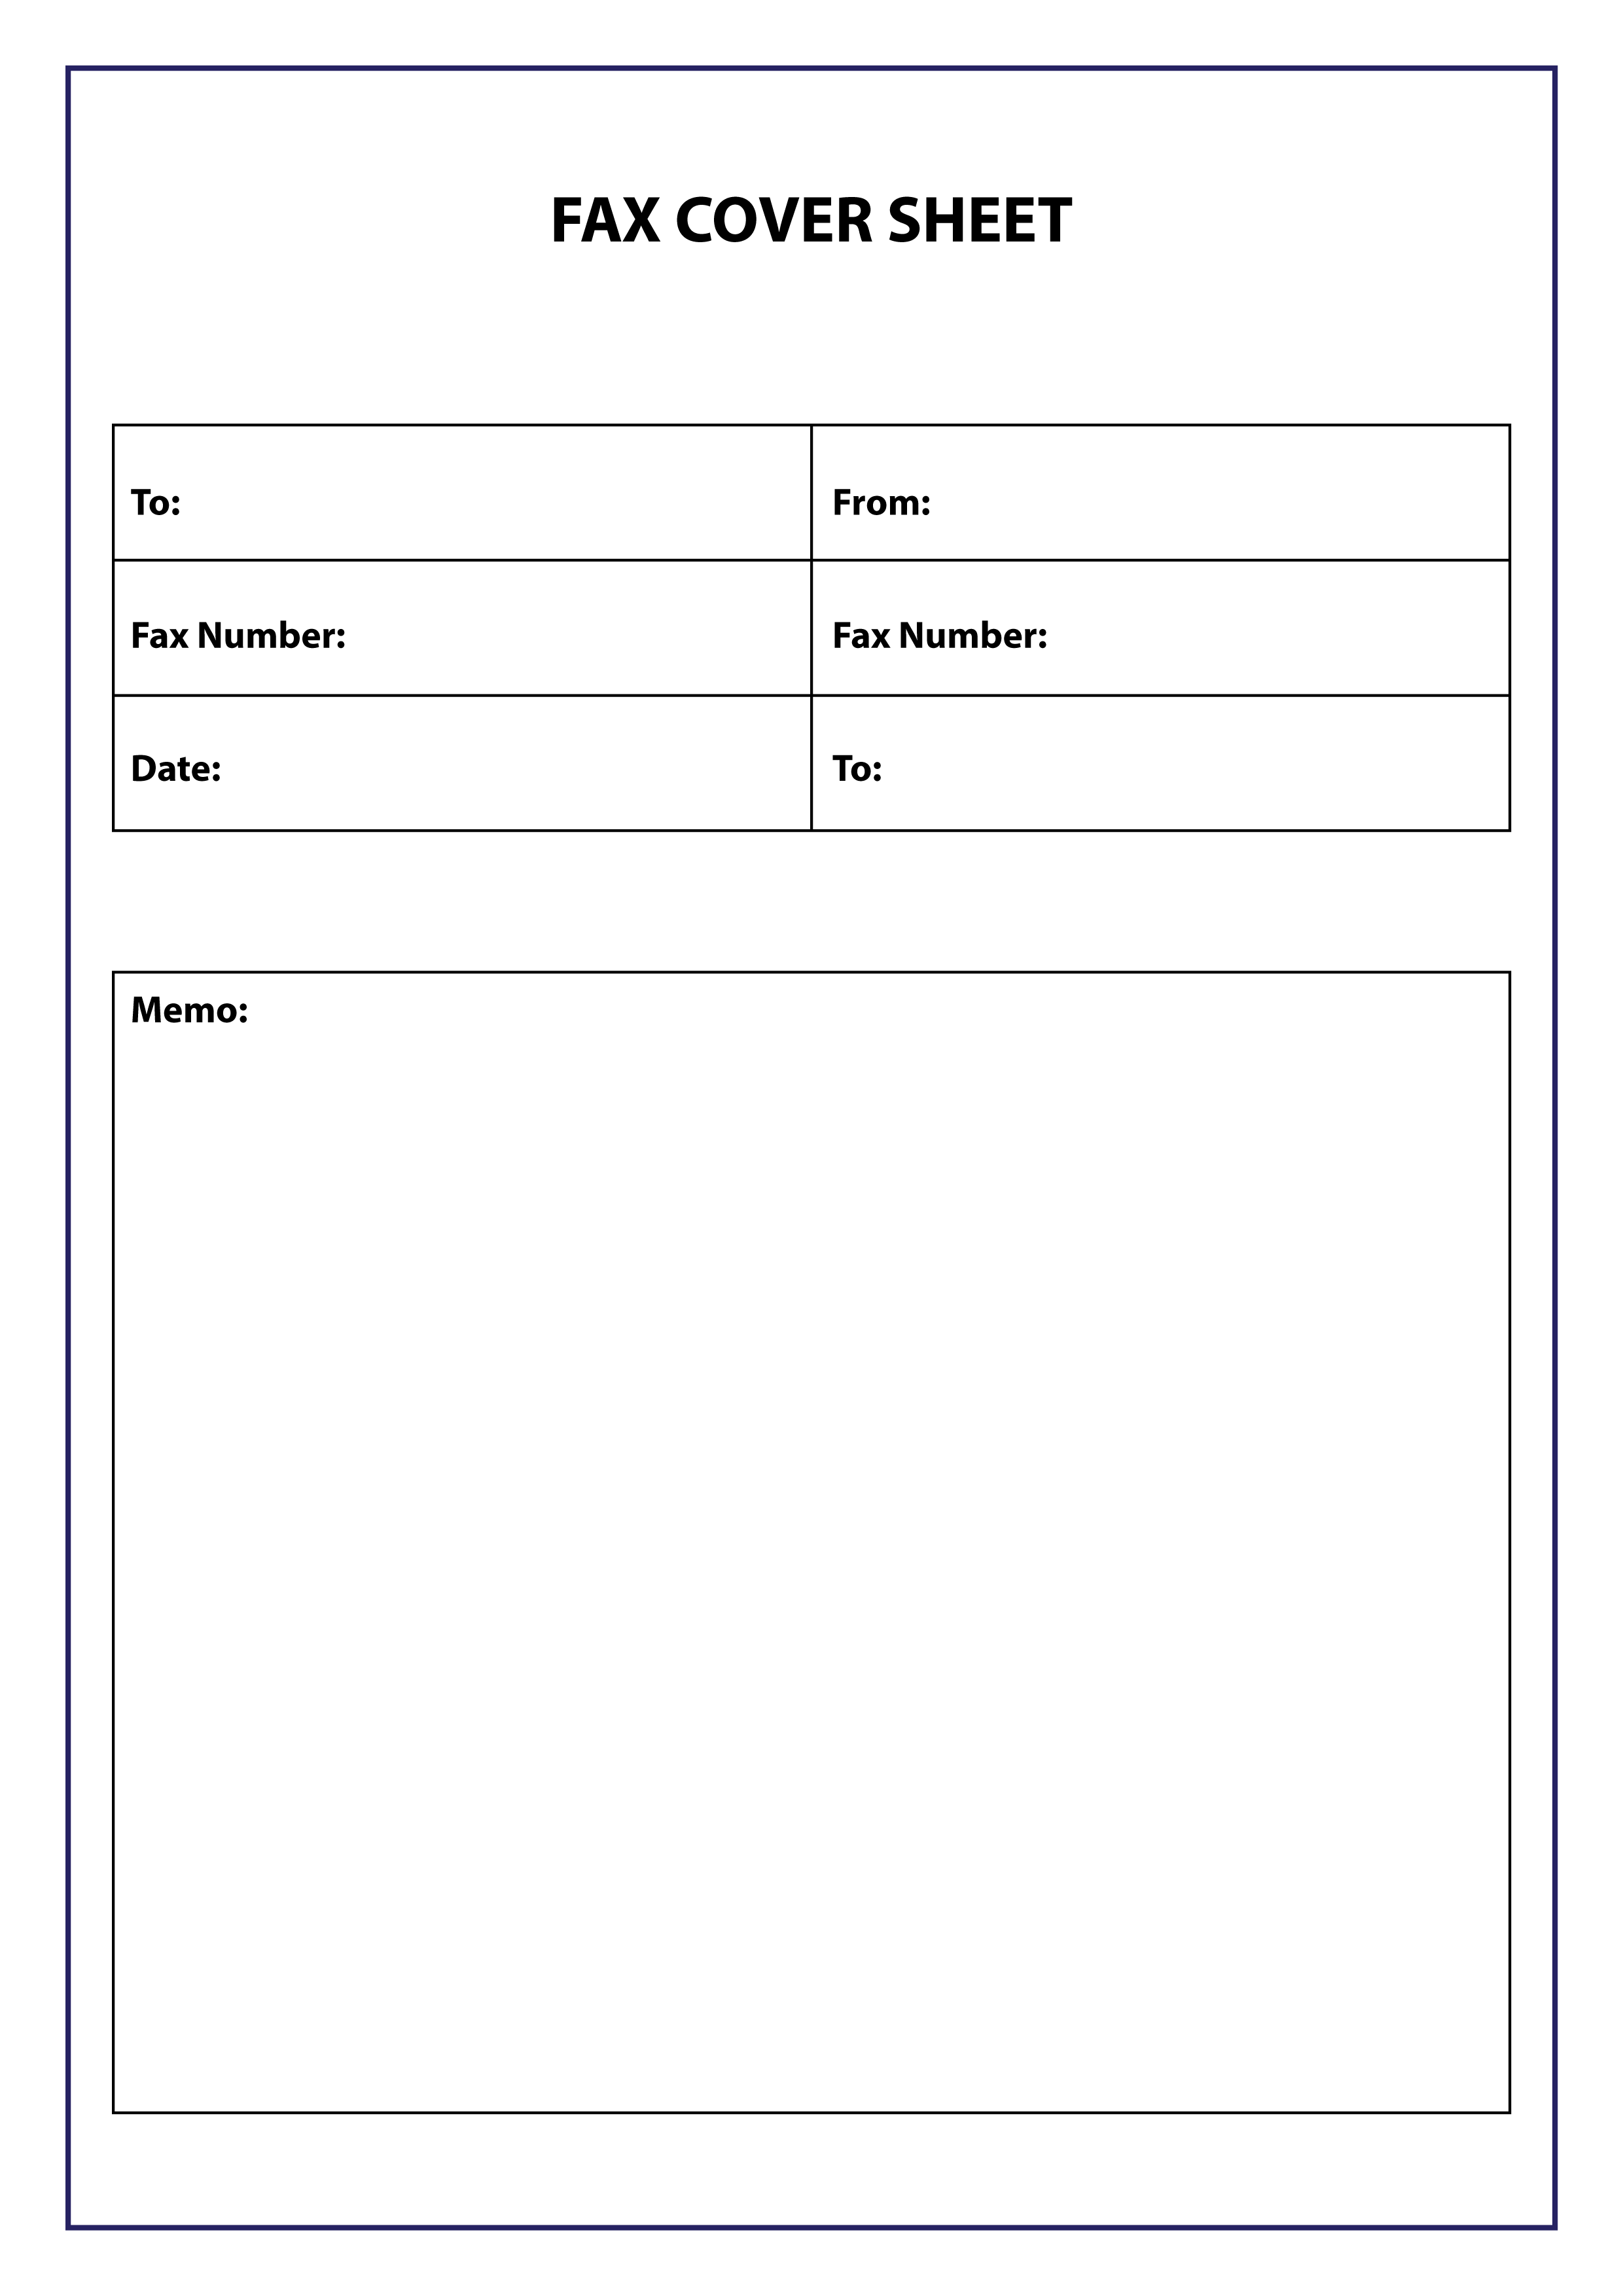 Fax Cover Sheet Template, Free Fax Cover Letter